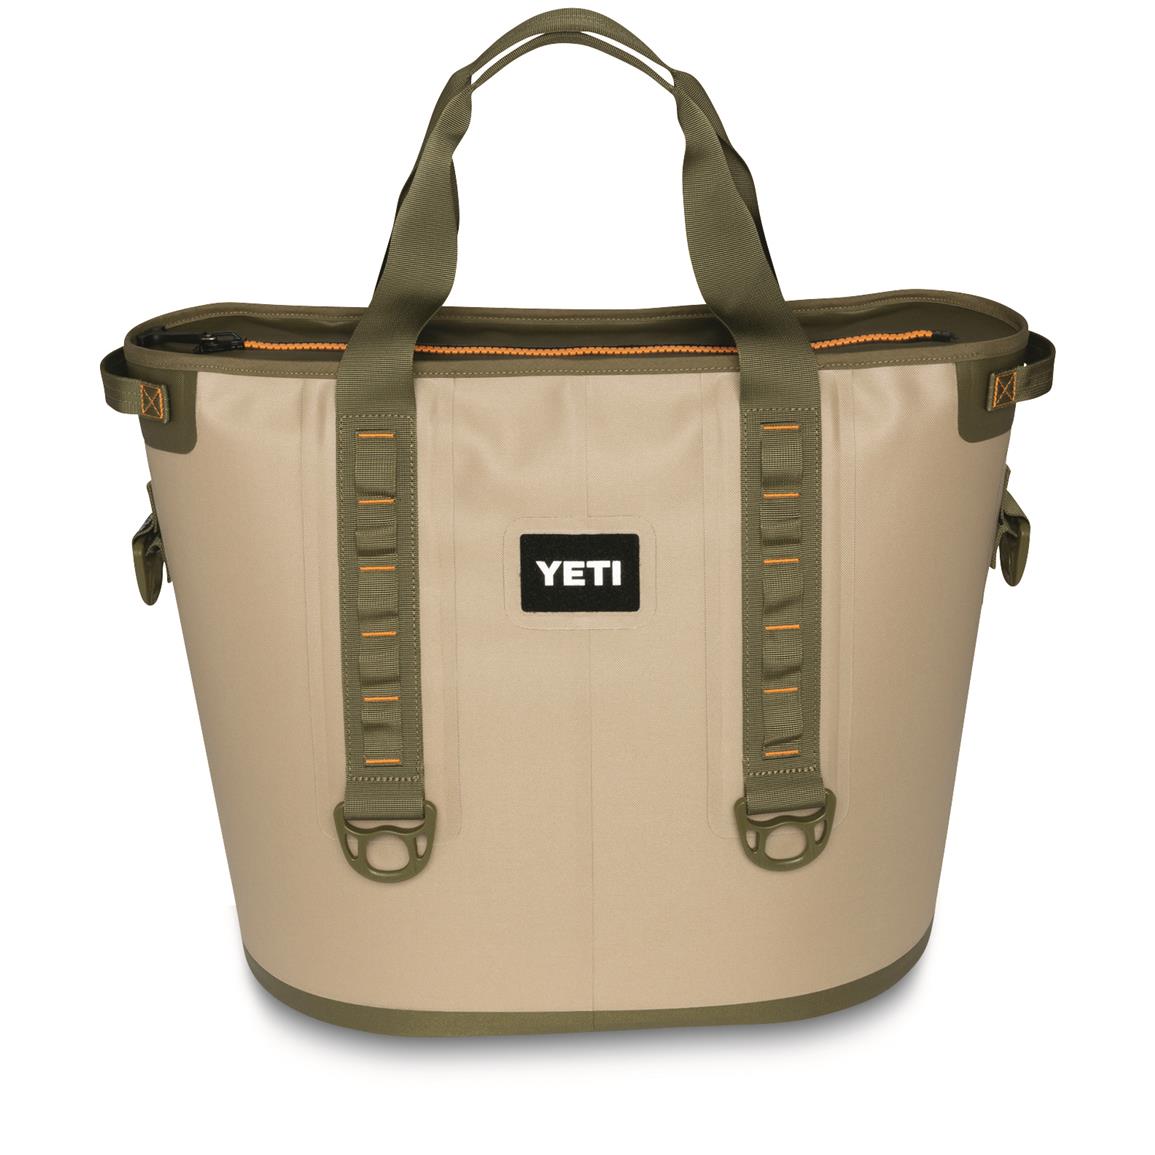 YETI Hopper 40 Soft Cooler - 690418, Coolers at Sportsman's Guide